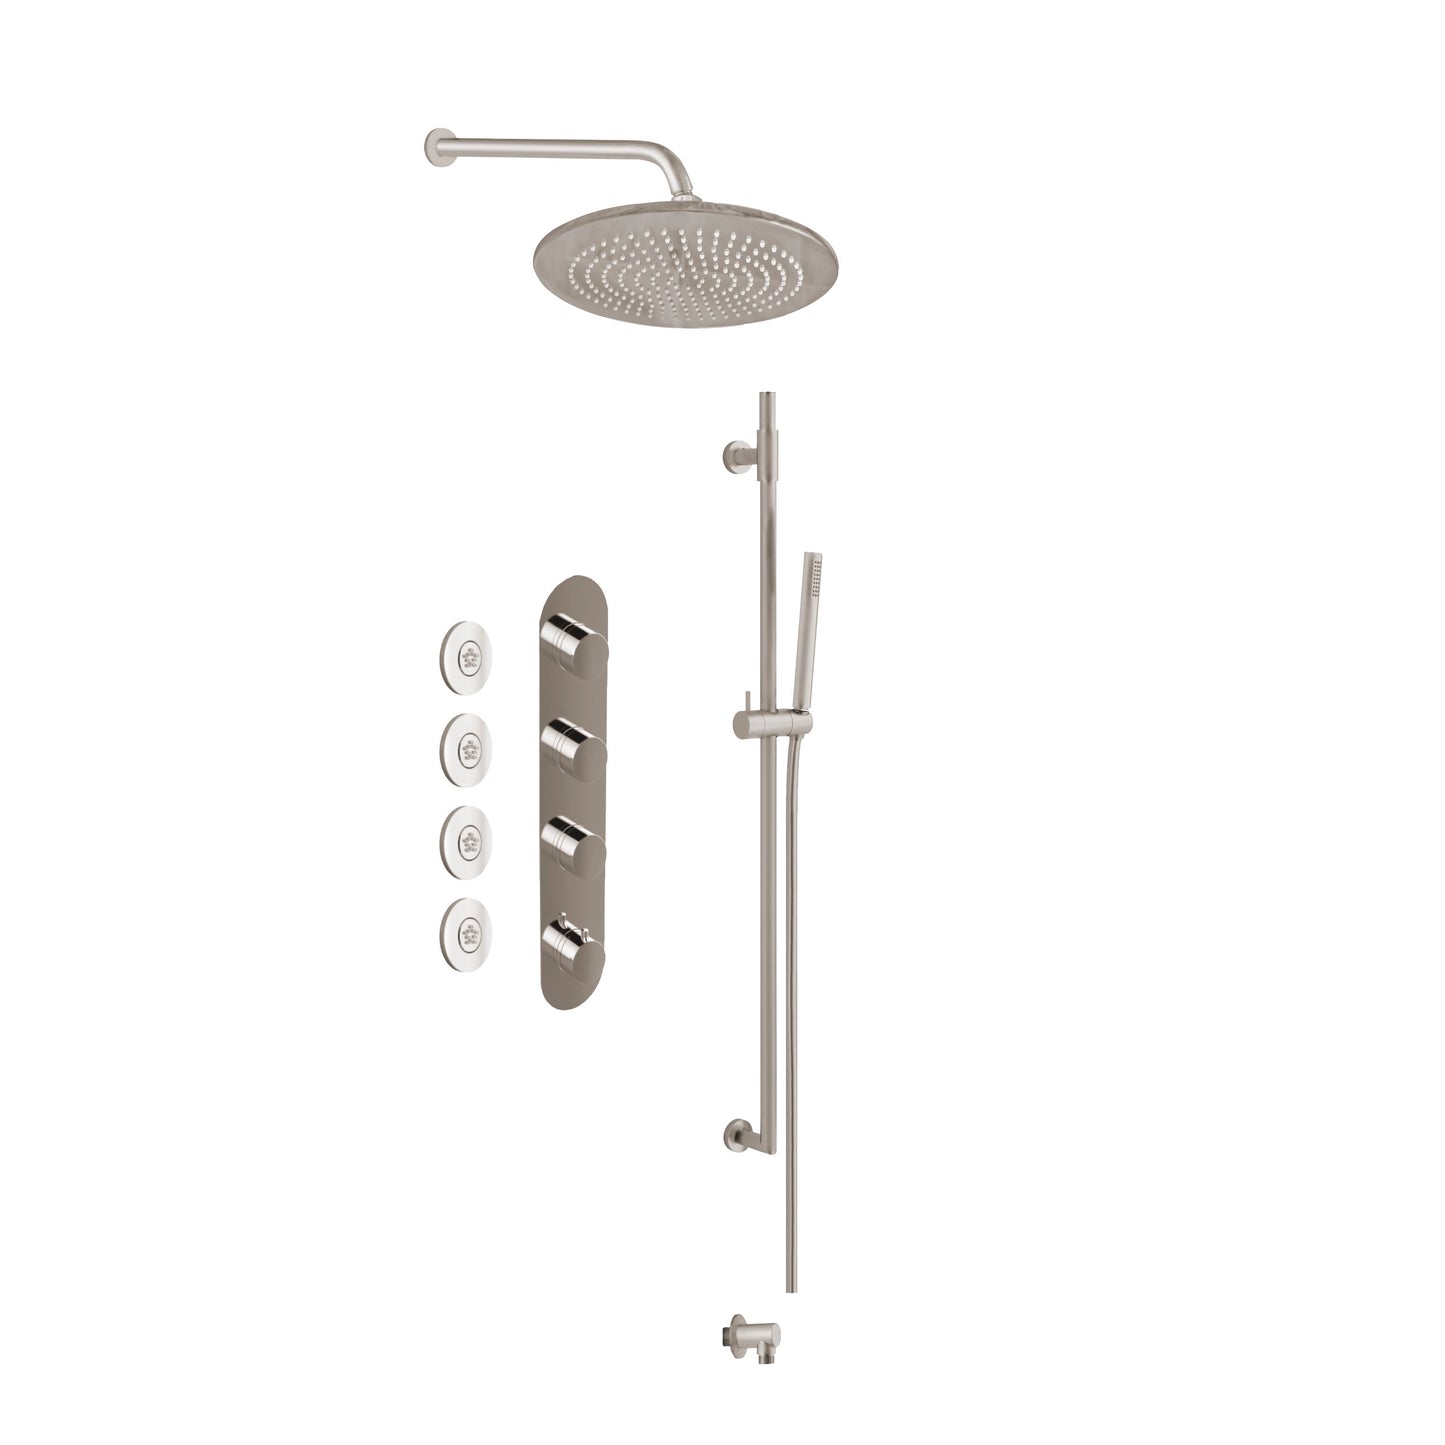 Aquadesign Products Shower Kit (Contempo X1800CT-A) - Brushed Nickel